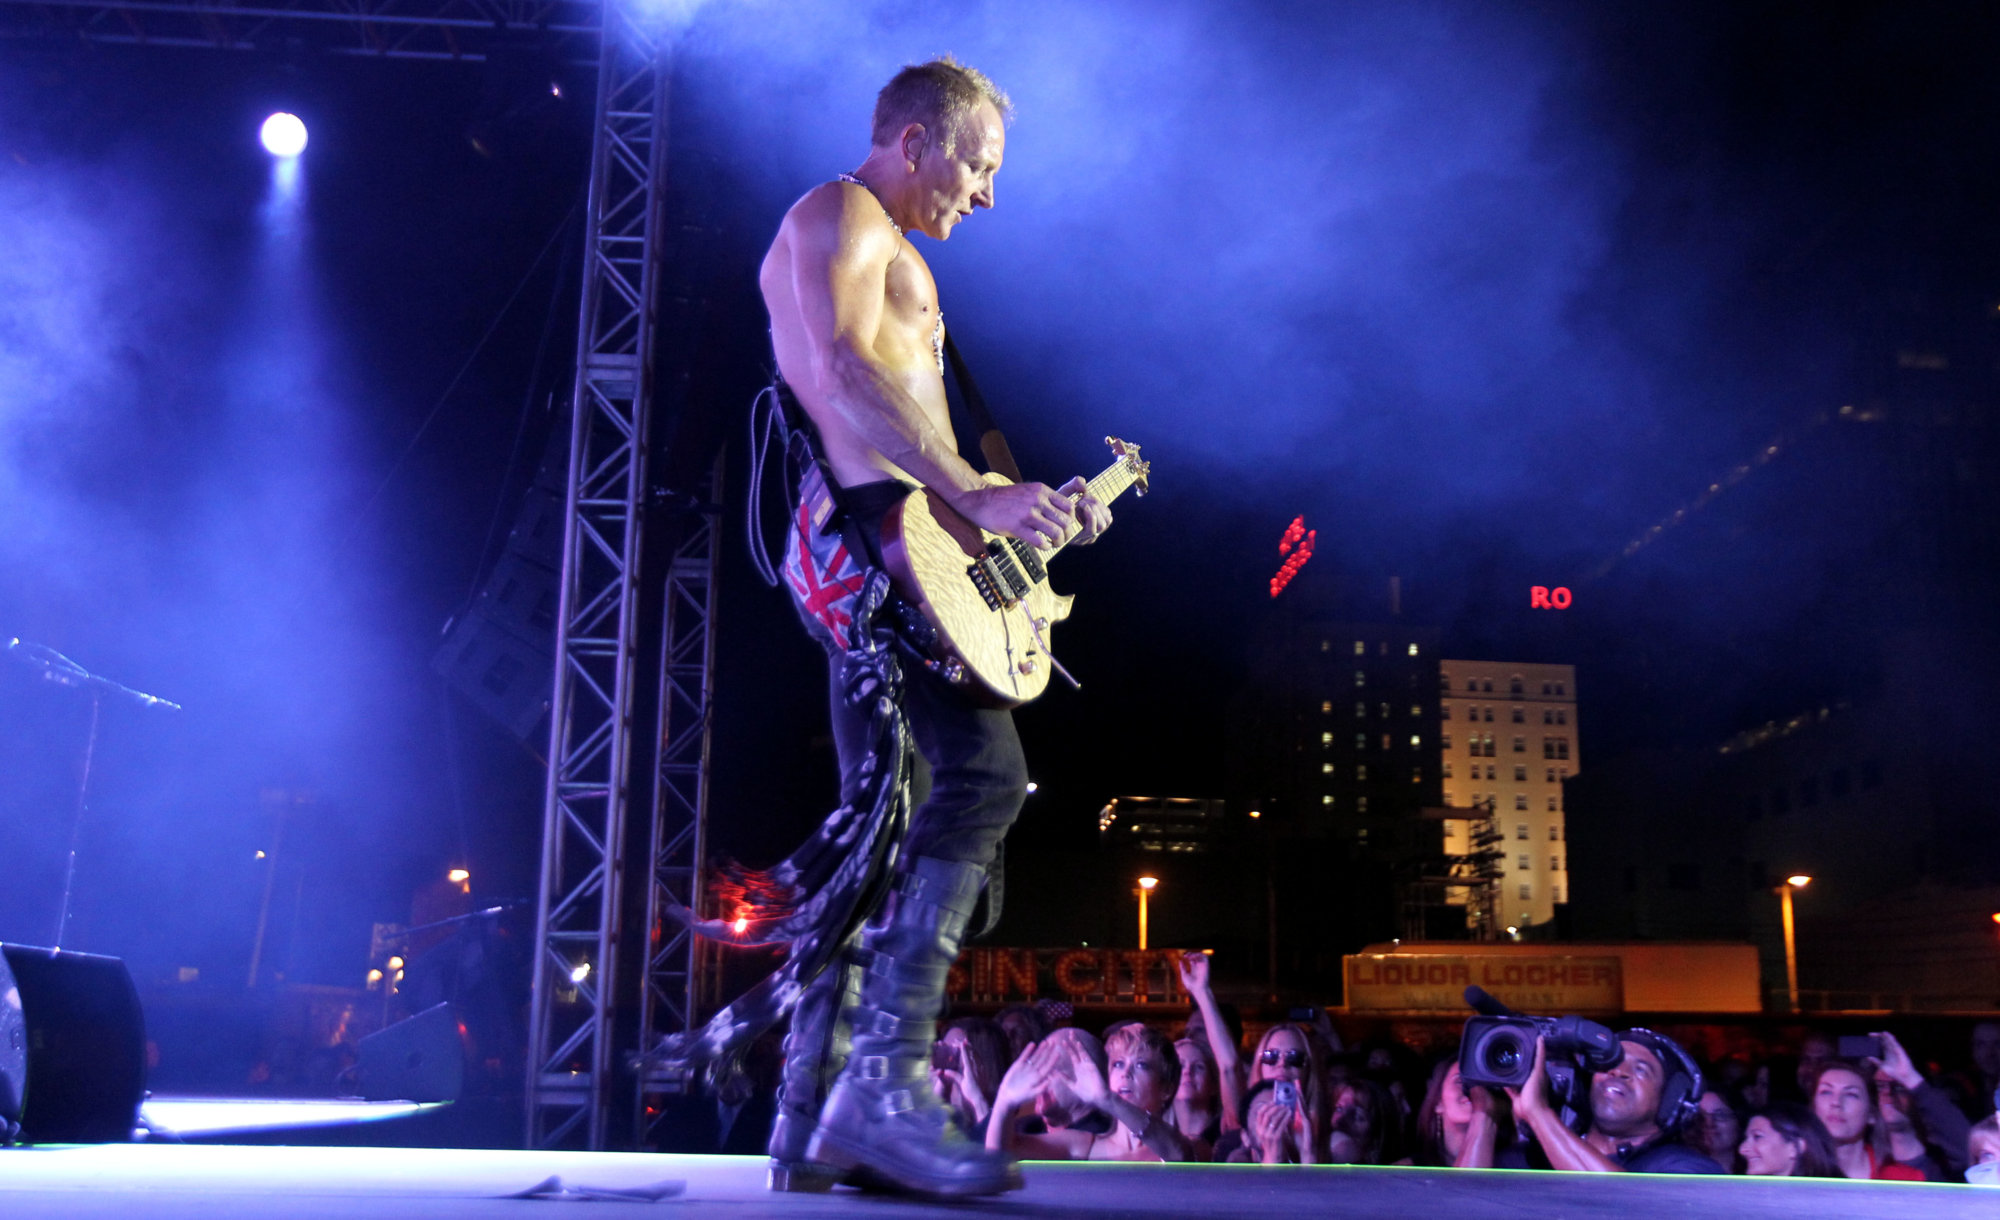 Red Hot Chili Peppers' Flea on God, podcasting and fatherhood